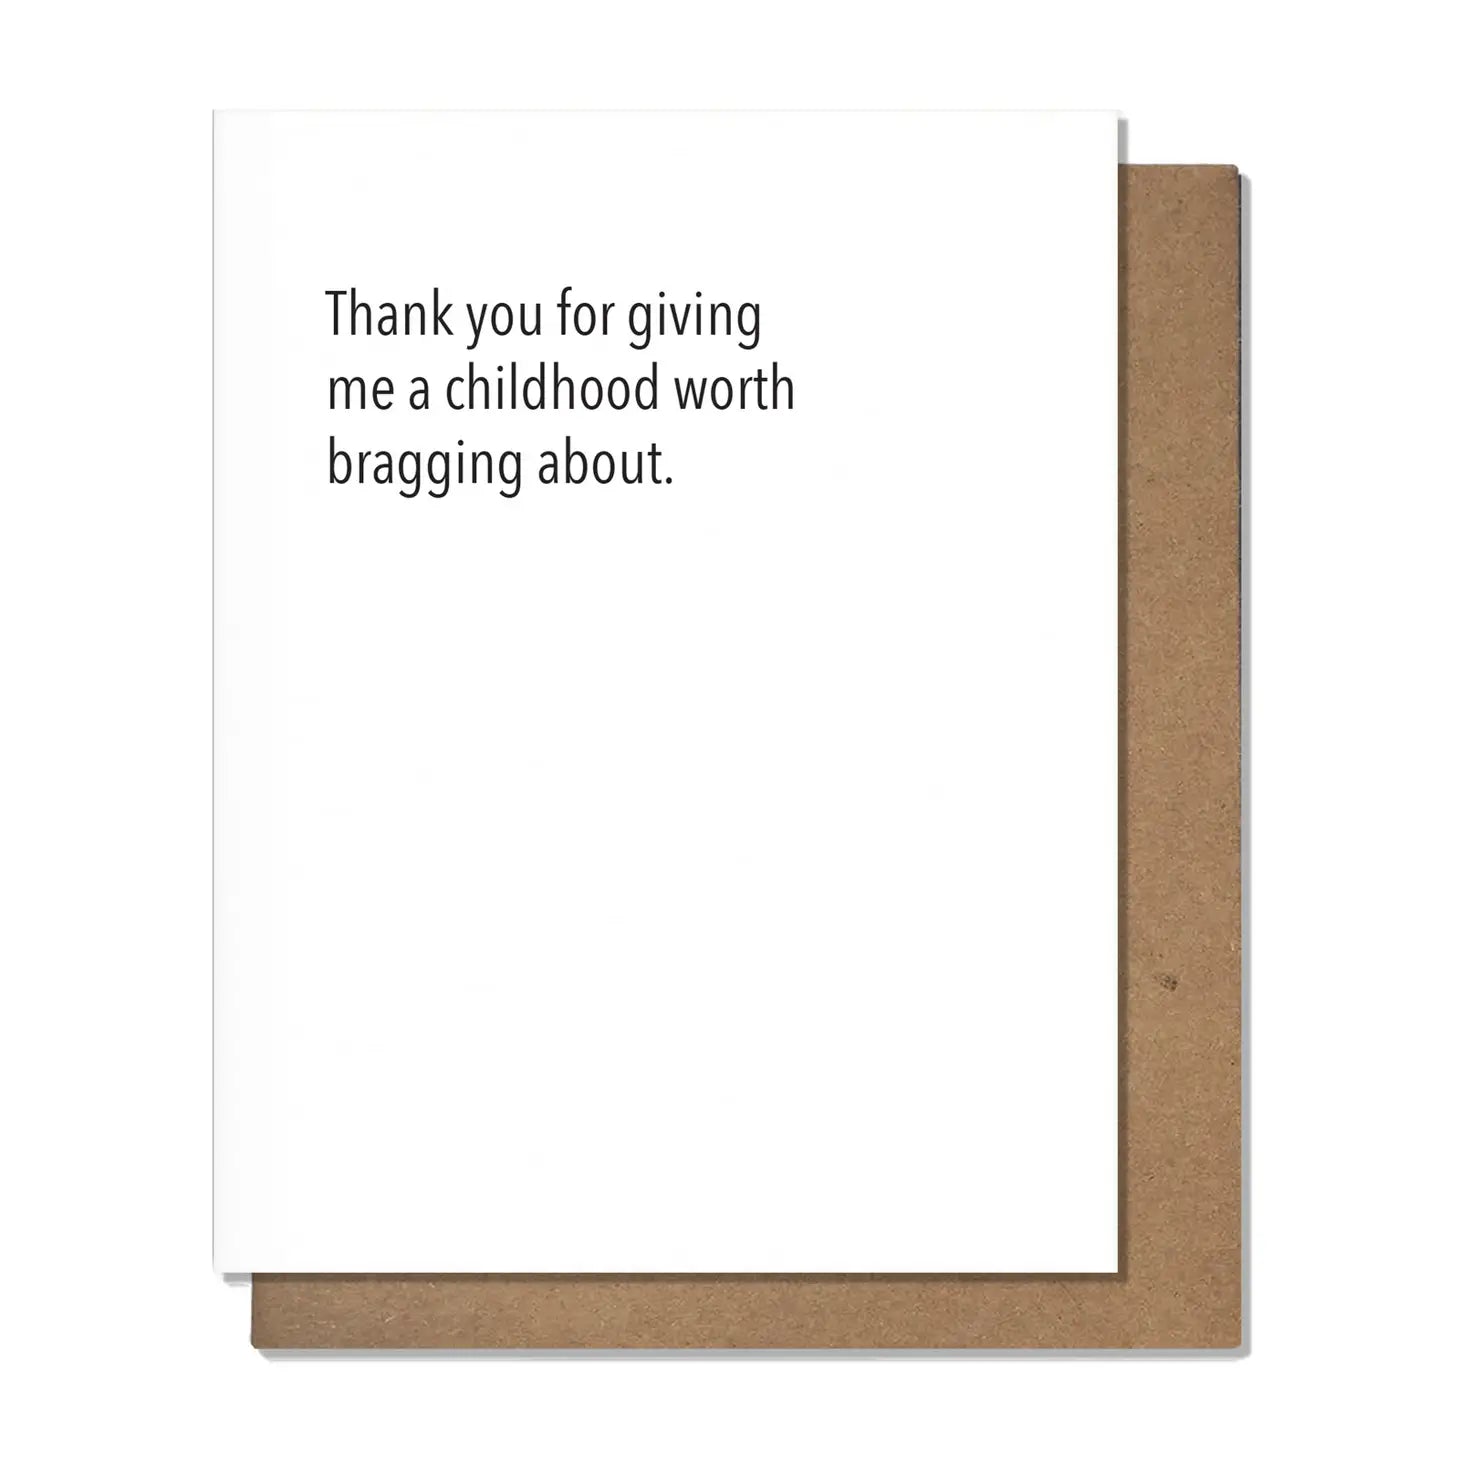 Standard greeting card.  Blank inside for your message.  Card reads: "Thank you for giving me a childhood worth bragging about."